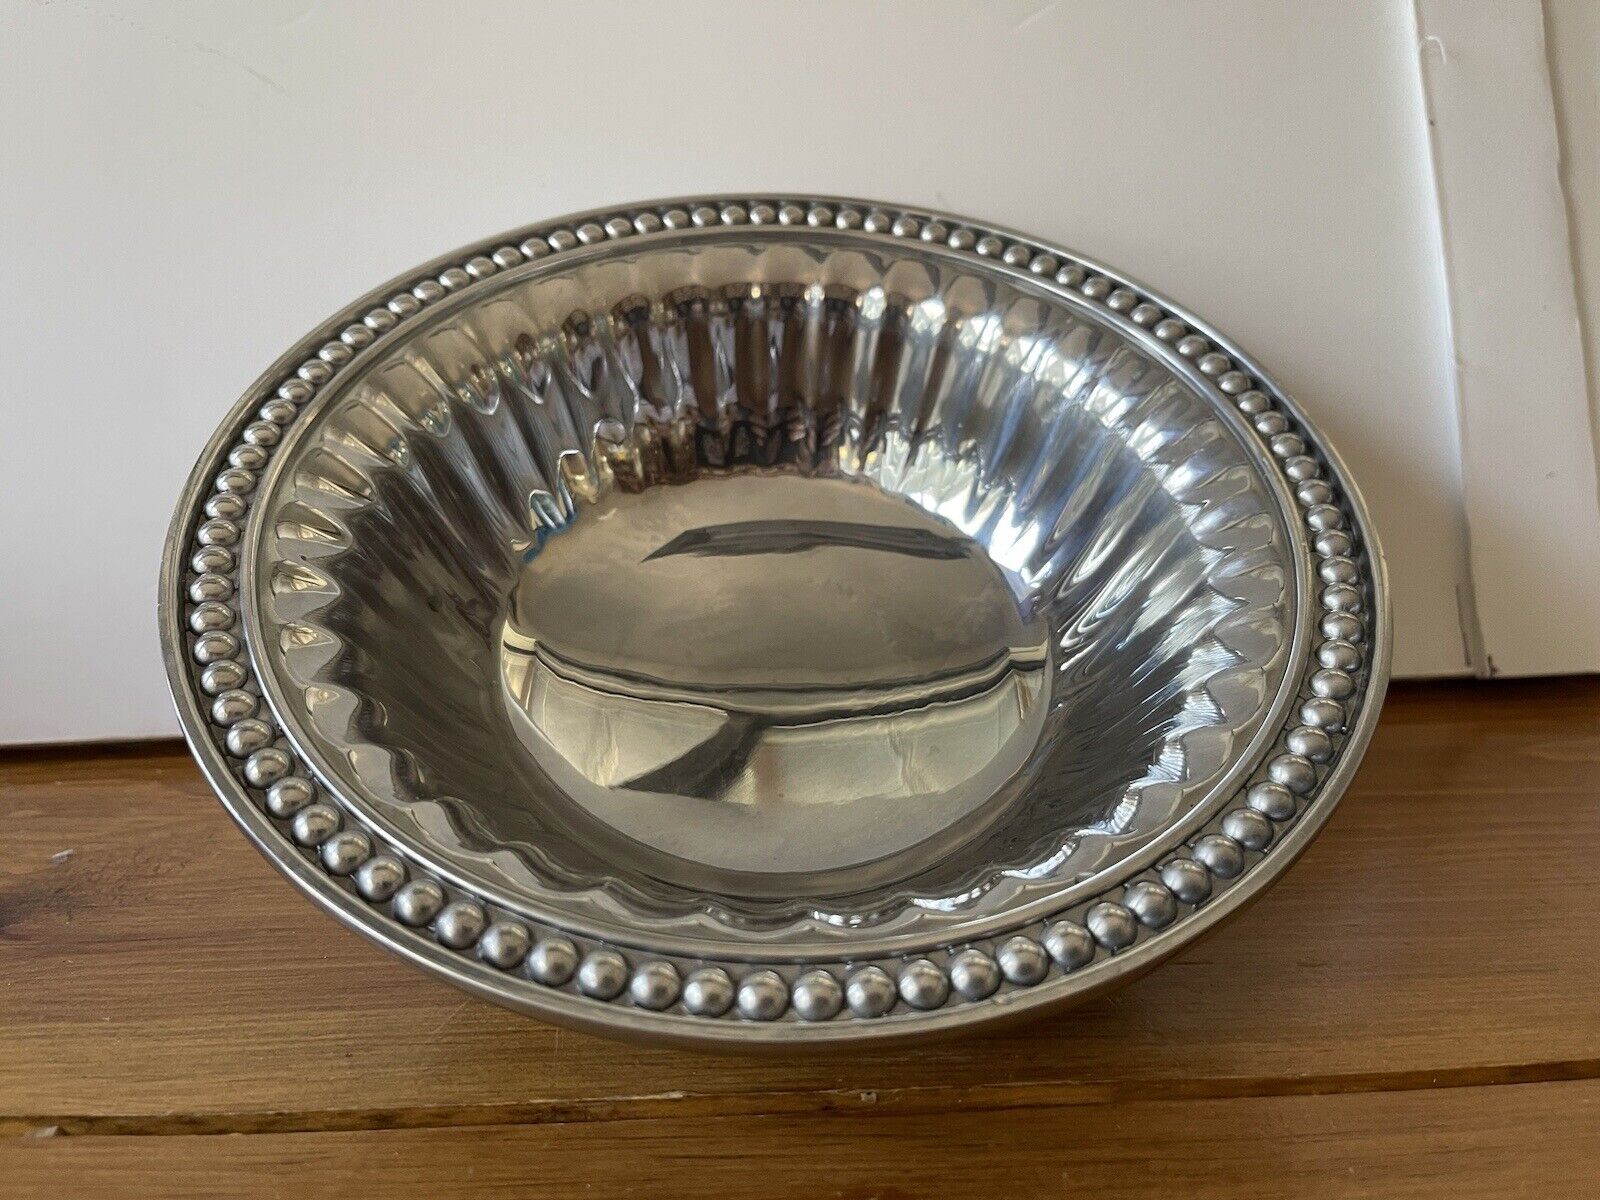 Wilton Armetale 8” Diameter Pewter Ribbed Serving Bowl Flutes and Pearls RWP